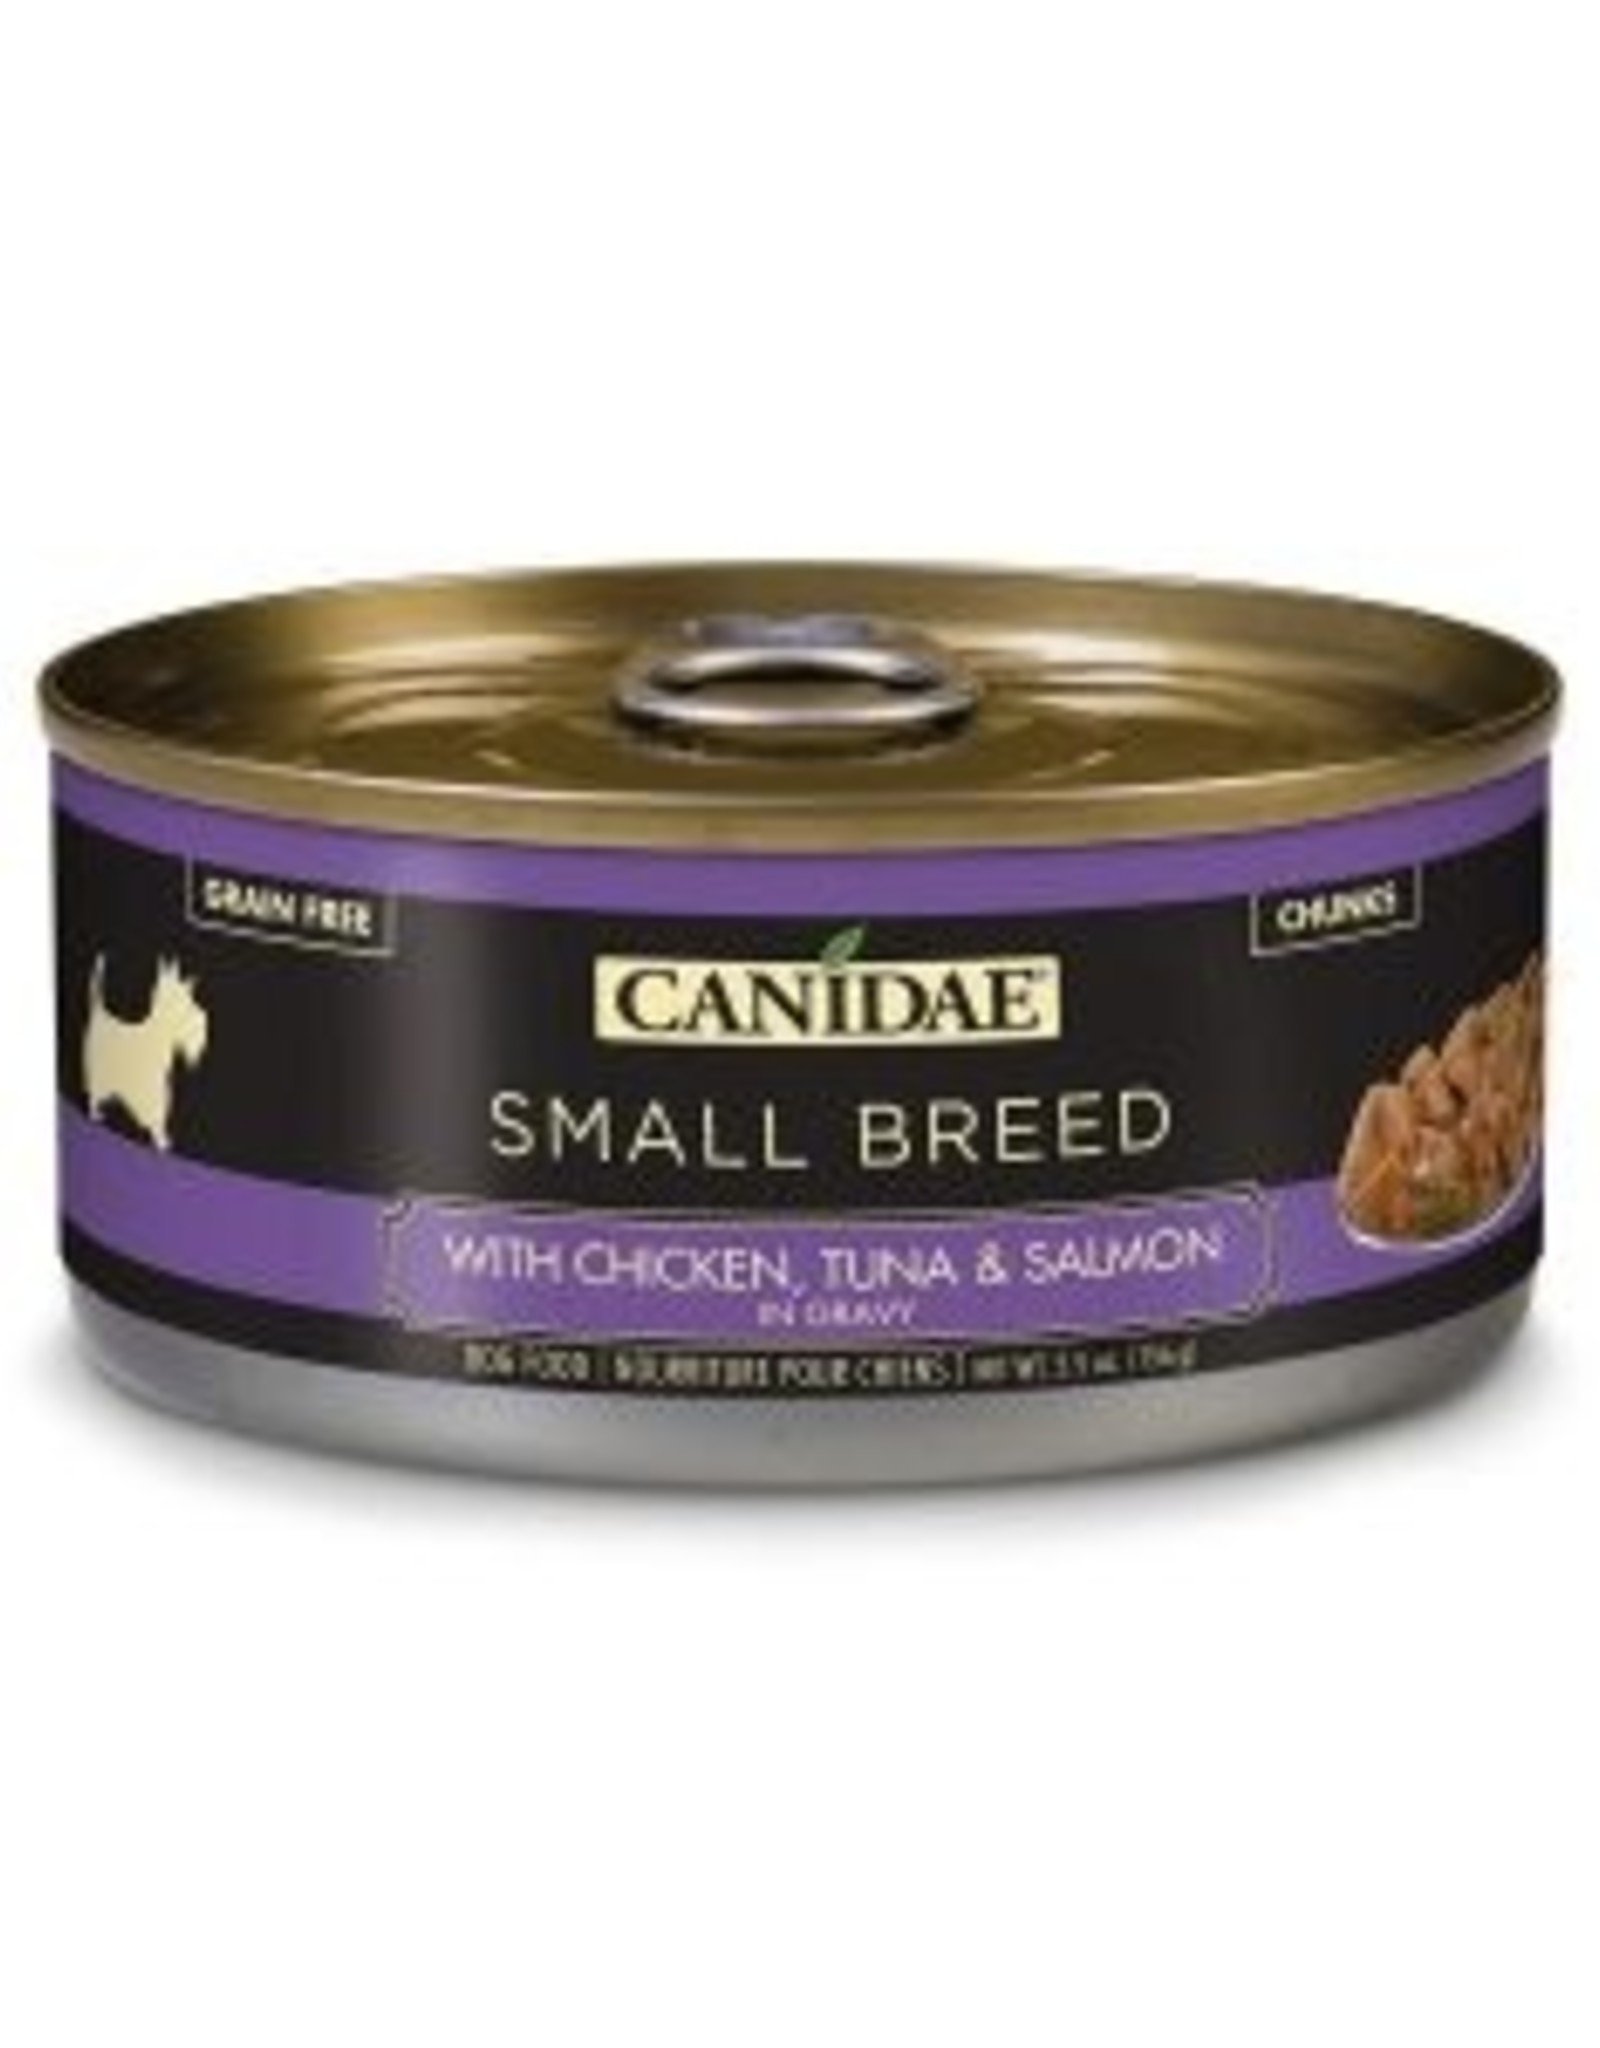 CANIDAE PET FOODS CANIDAE CAN DOG SMALL BREED CHICKEN, TUNA & SALMON IN GRAVY 5.5OZ